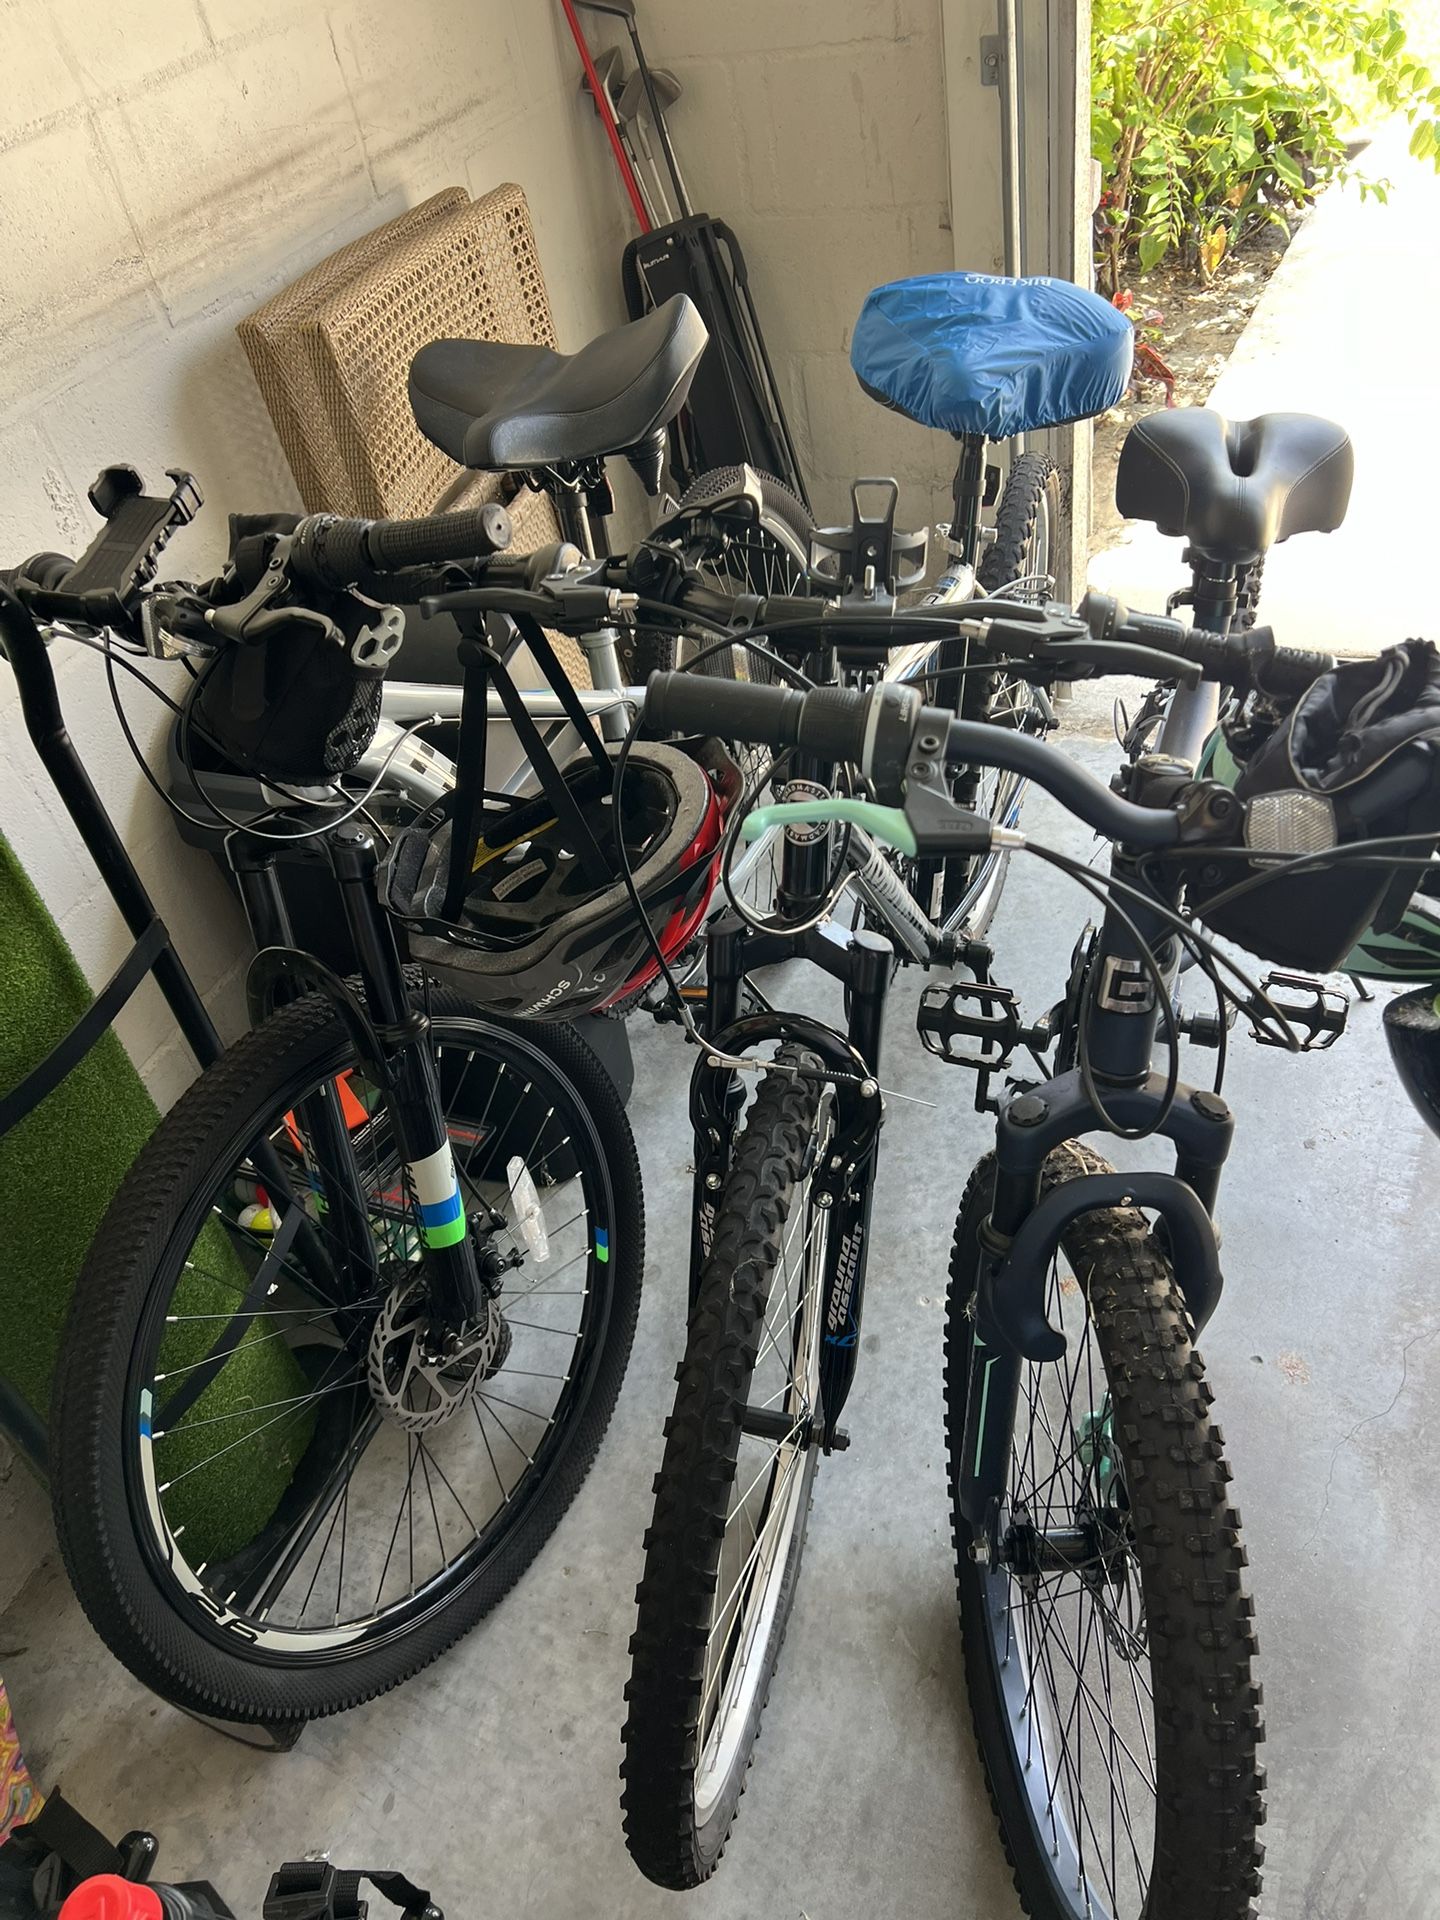 3 Very Nice Bikes In Excellent Condition